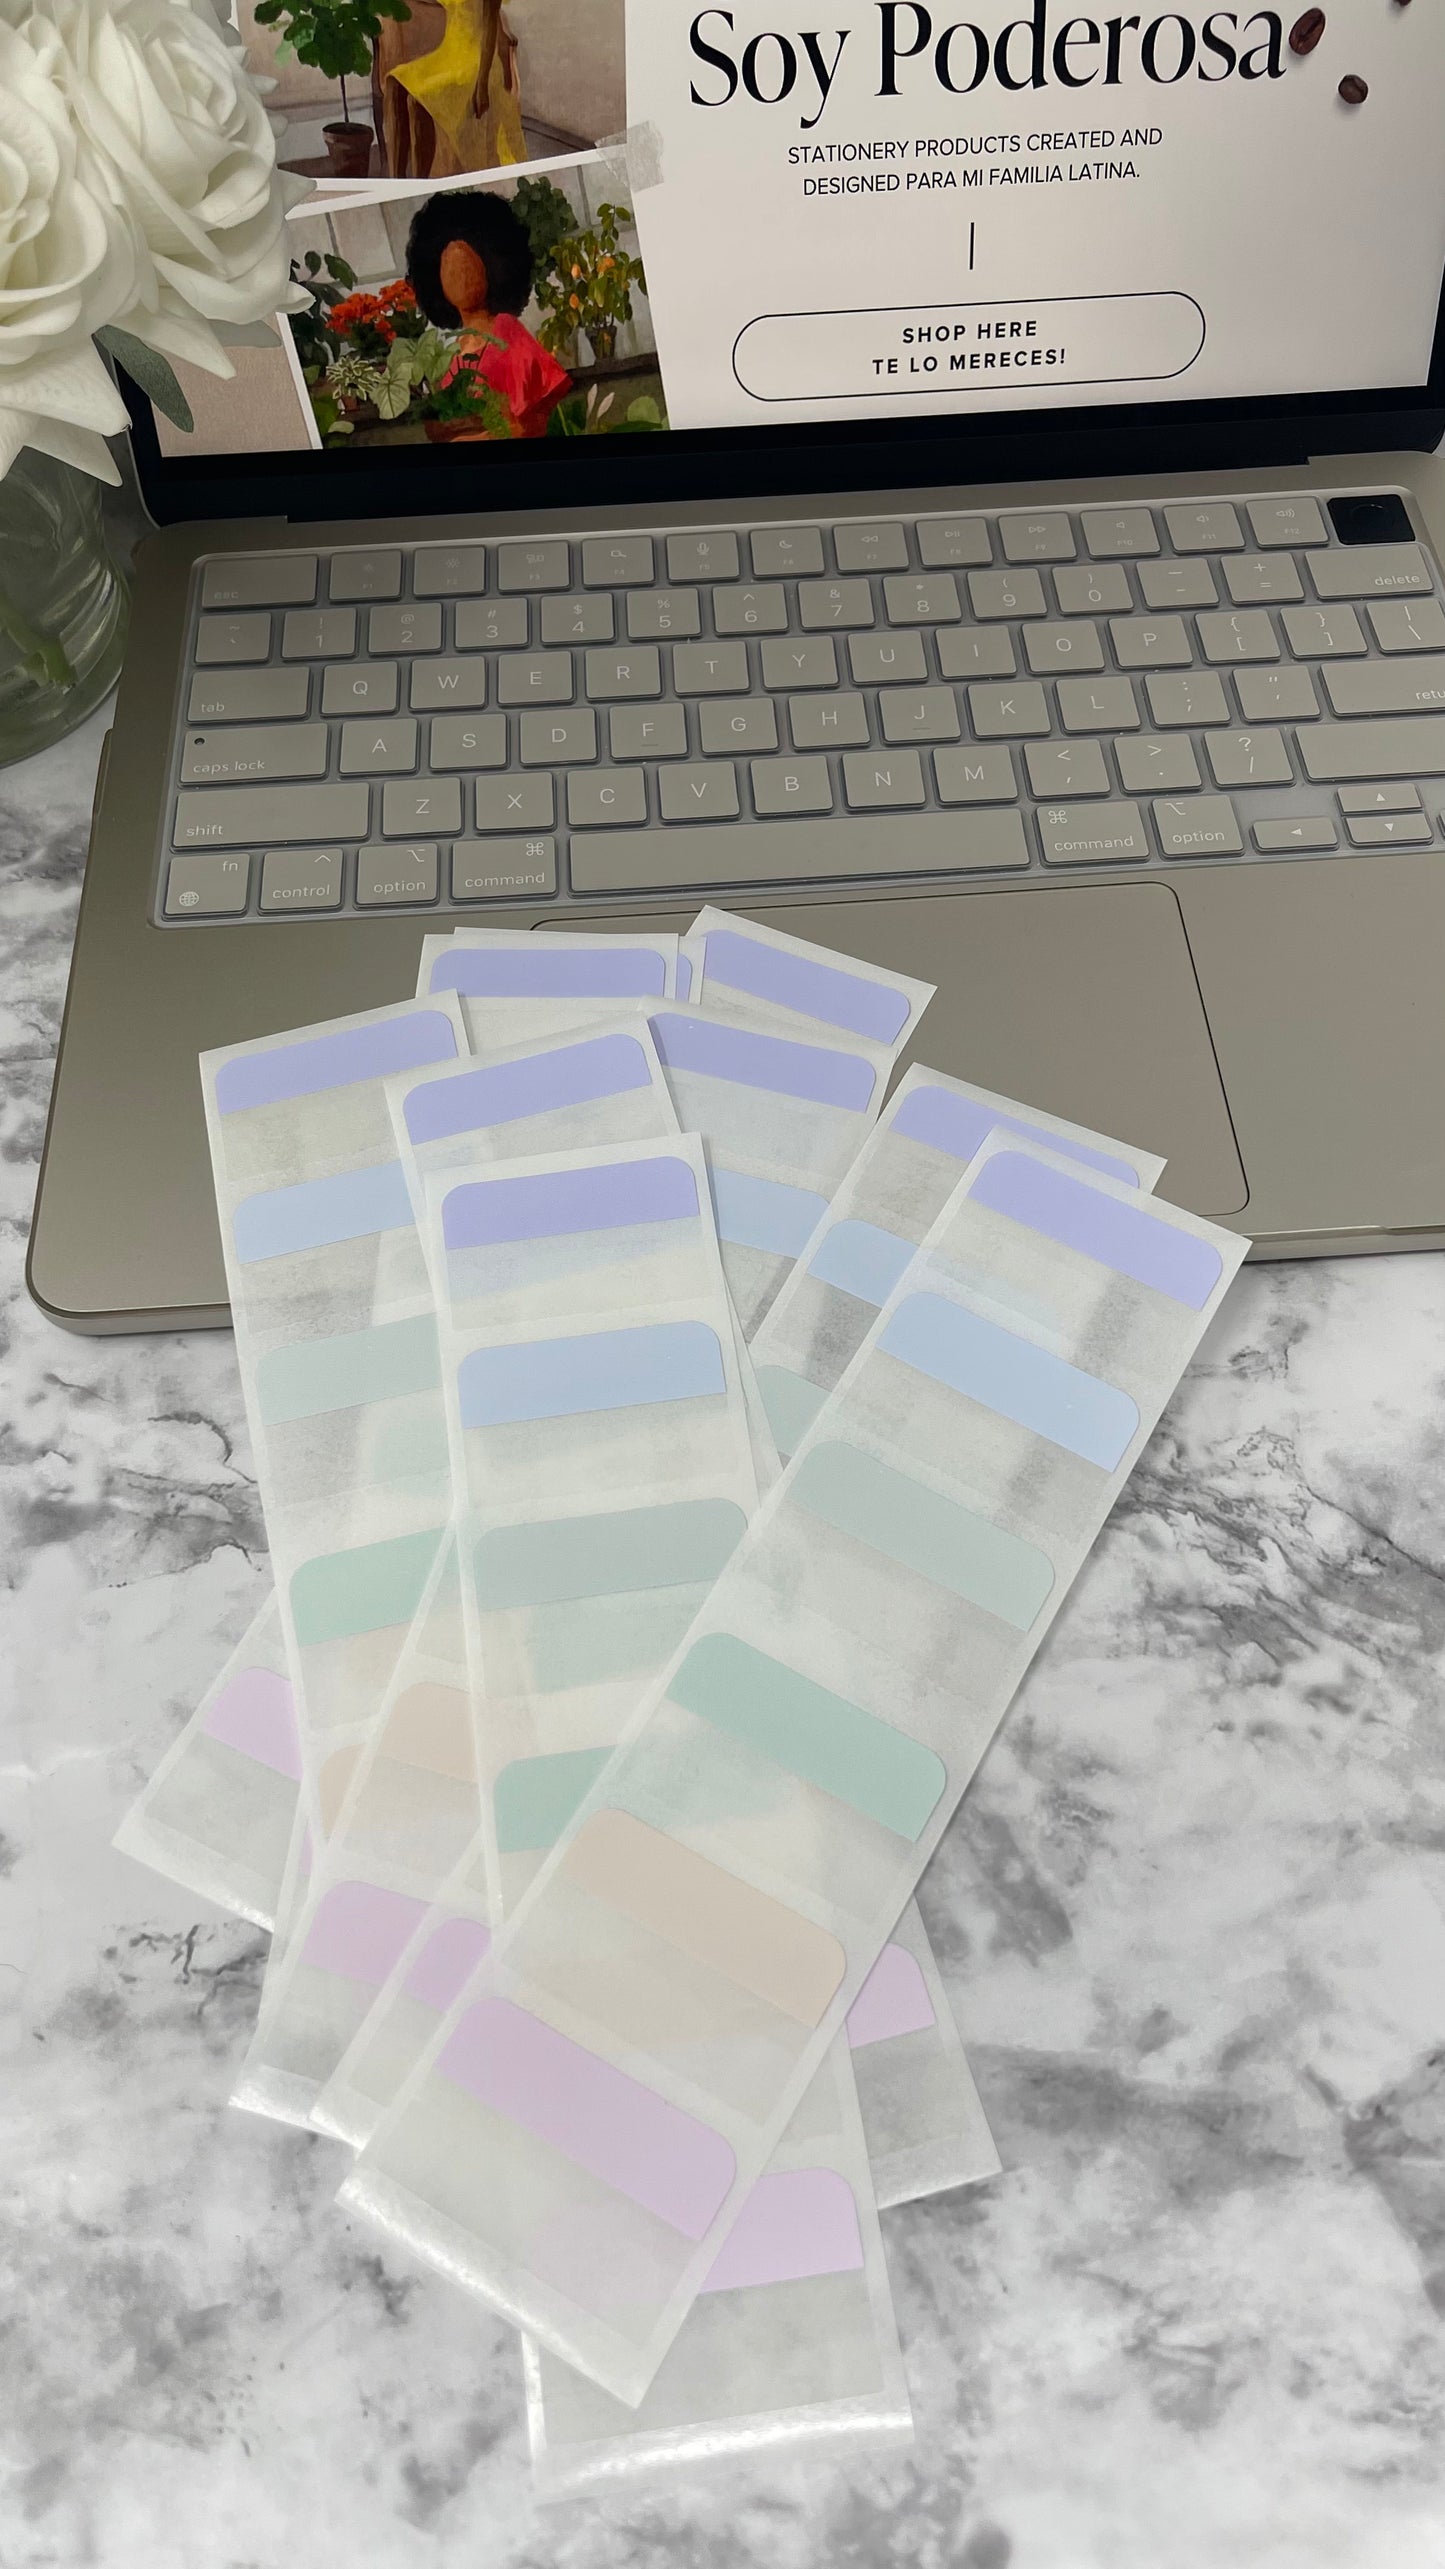 This set of 10 one-sided writeable label index sticky notes is perfect for organizing and labeling. The set comes with 6 different pastel colors (total of 60), allowing you to customize your labeling needs. They are great for labeling folders, documents, and other items. The pastel colors add a subtle, stylish look while ensuring they won't take away from the look of your items.